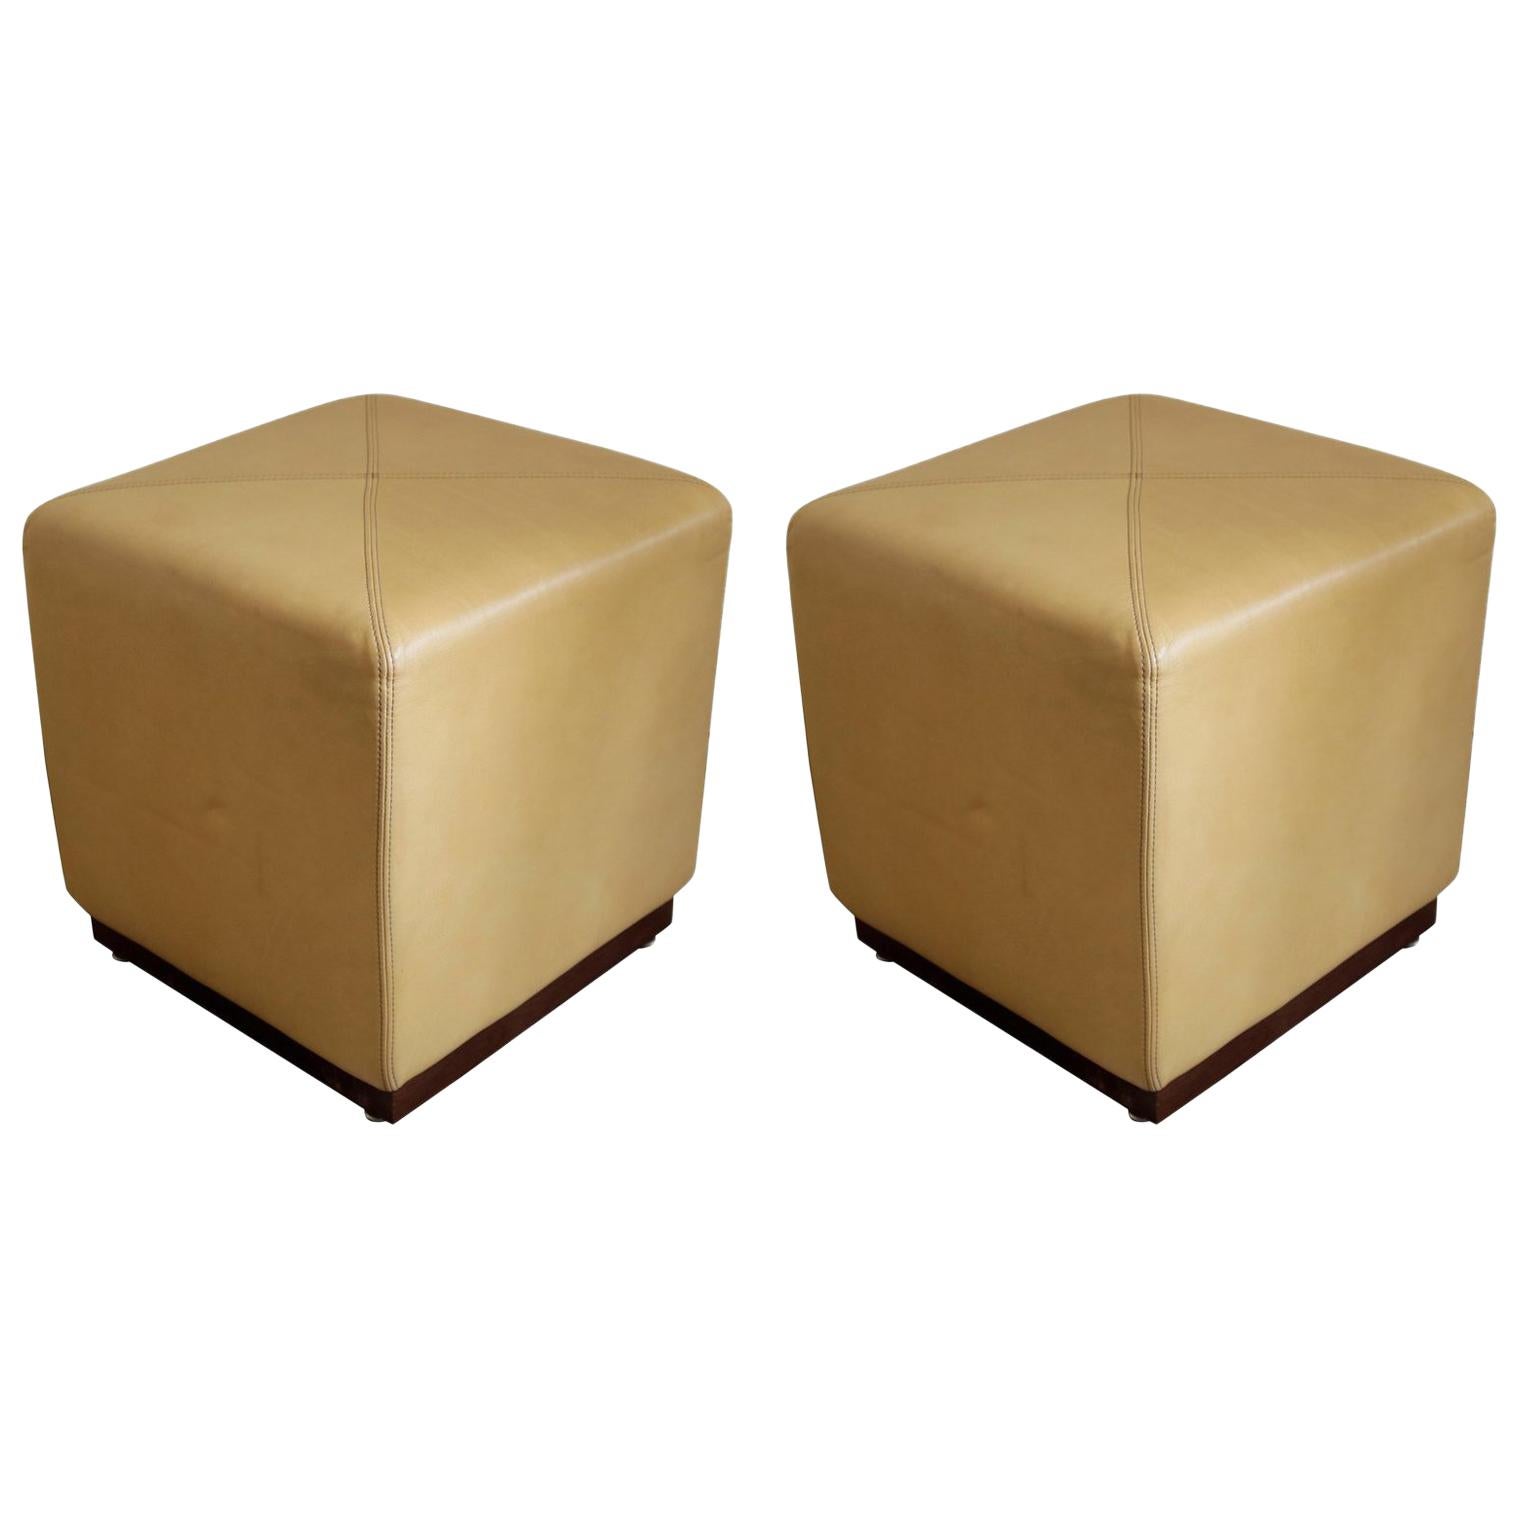 Pair of Camel Leather Stools